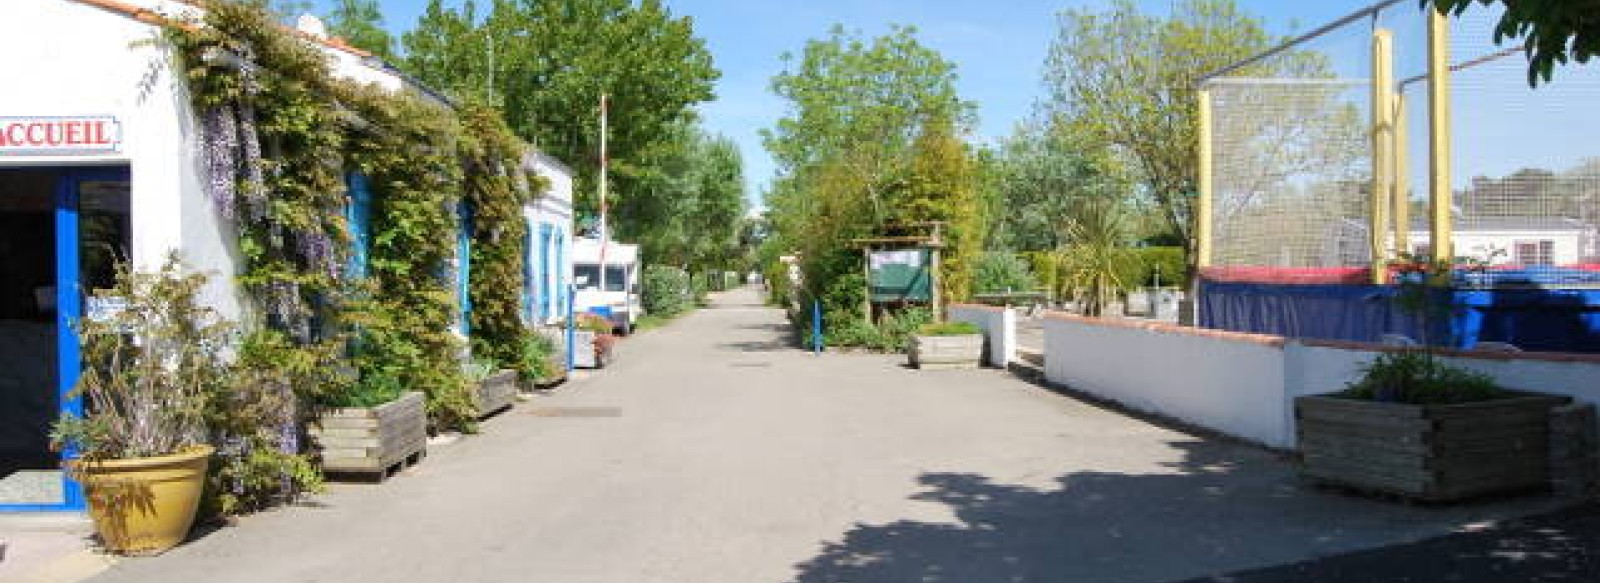 CAMPING DES ROUSSIERES